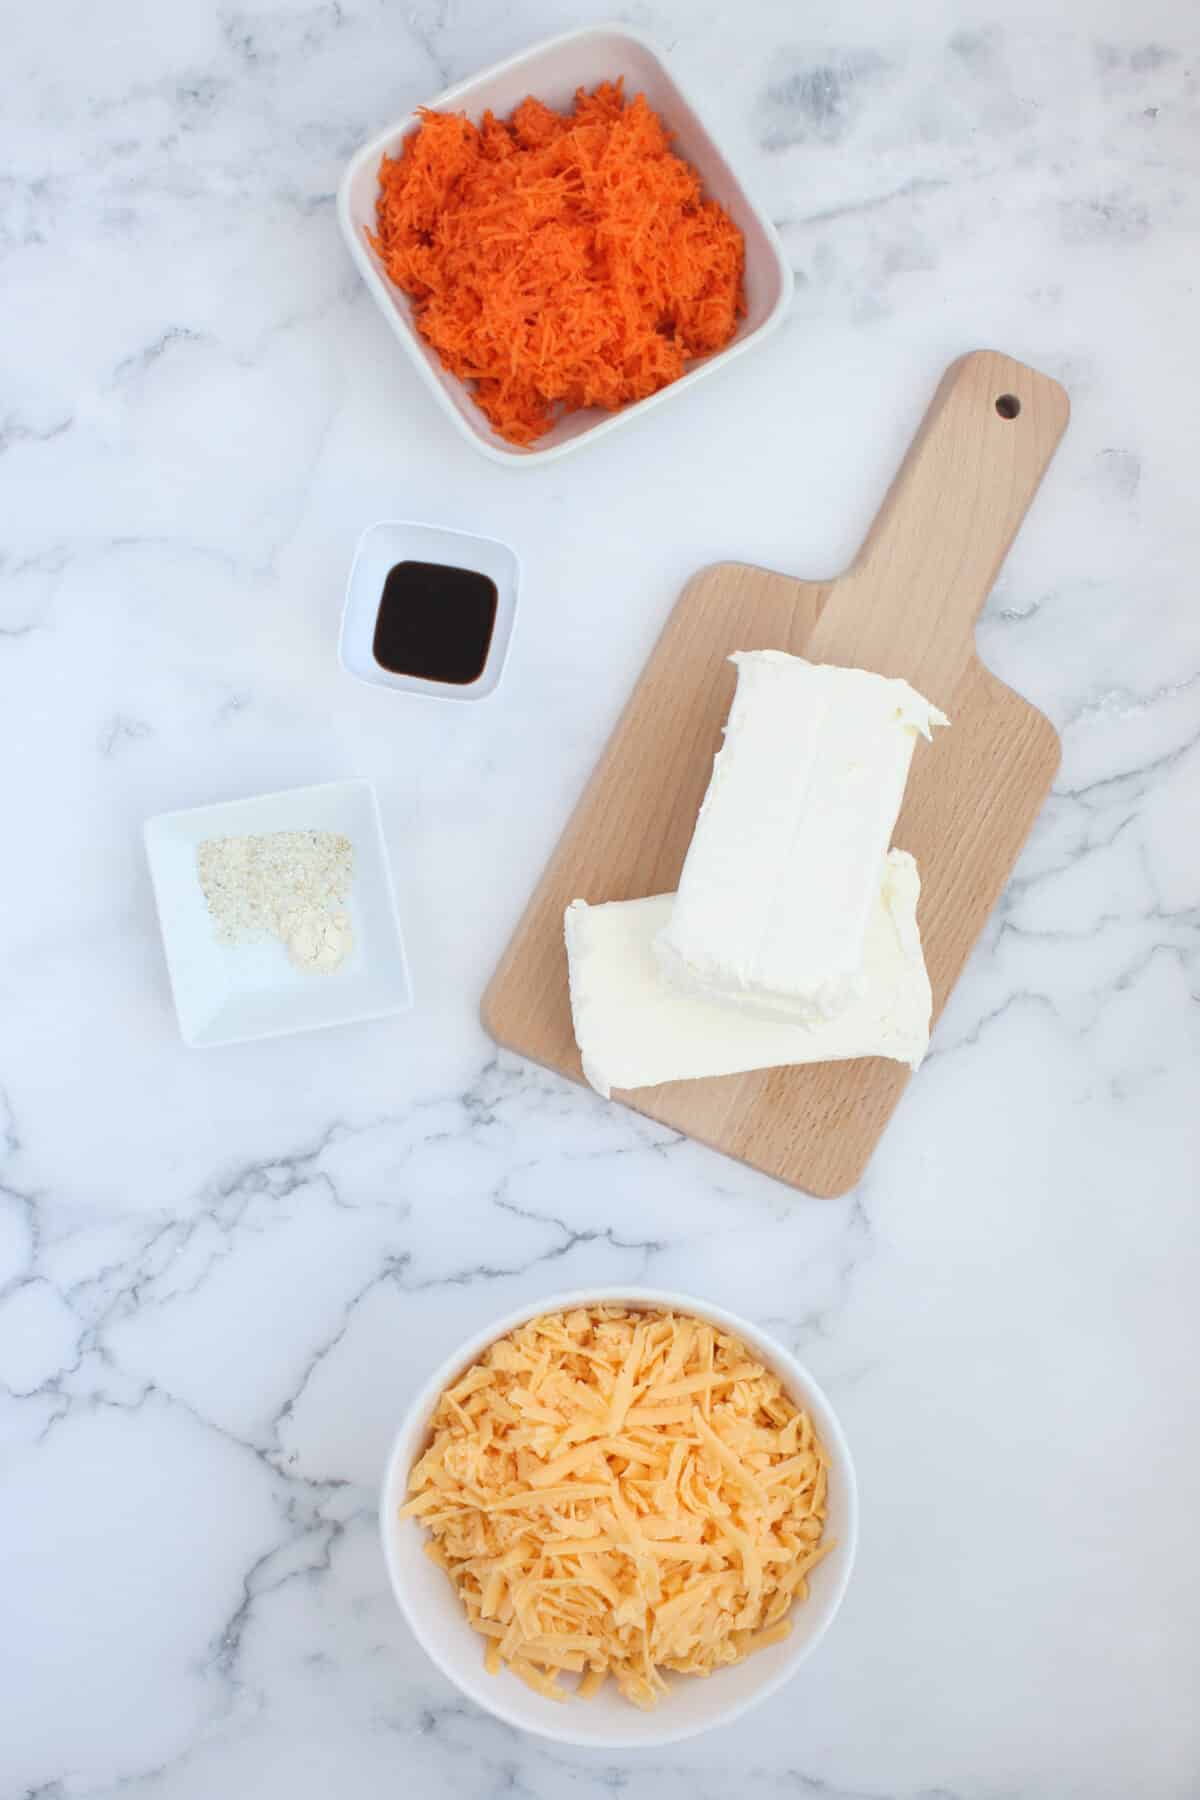 Ingredients for Carrot Cheese Ball. Shredded carrots, worcestershire sauce, cream cheese, garlic salt, onion powder, and cheese